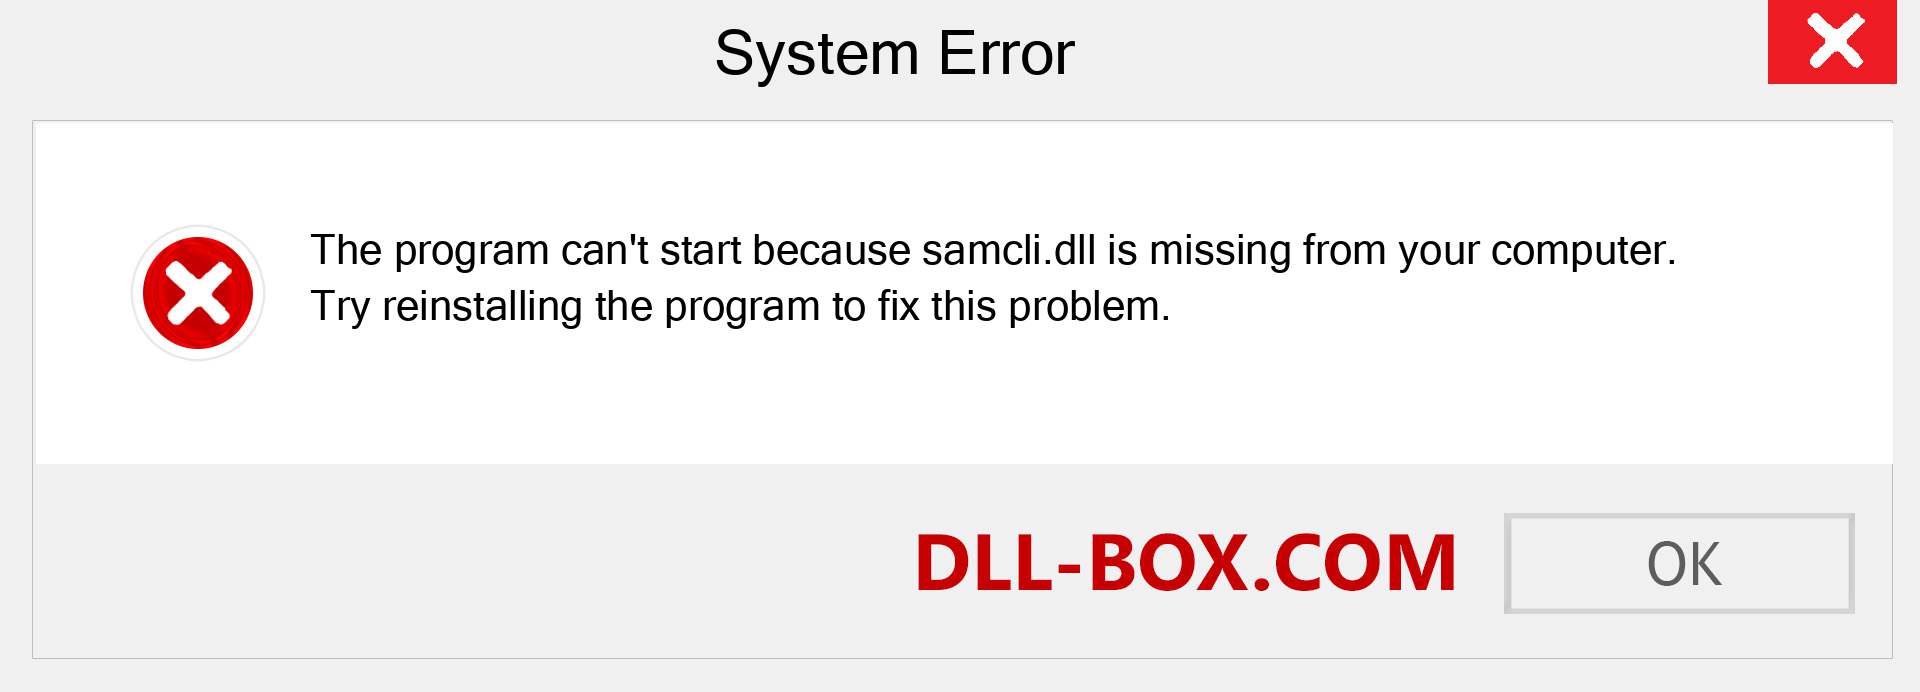  samcli.dll file is missing?. Download for Windows 7, 8, 10 - Fix  samcli dll Missing Error on Windows, photos, images